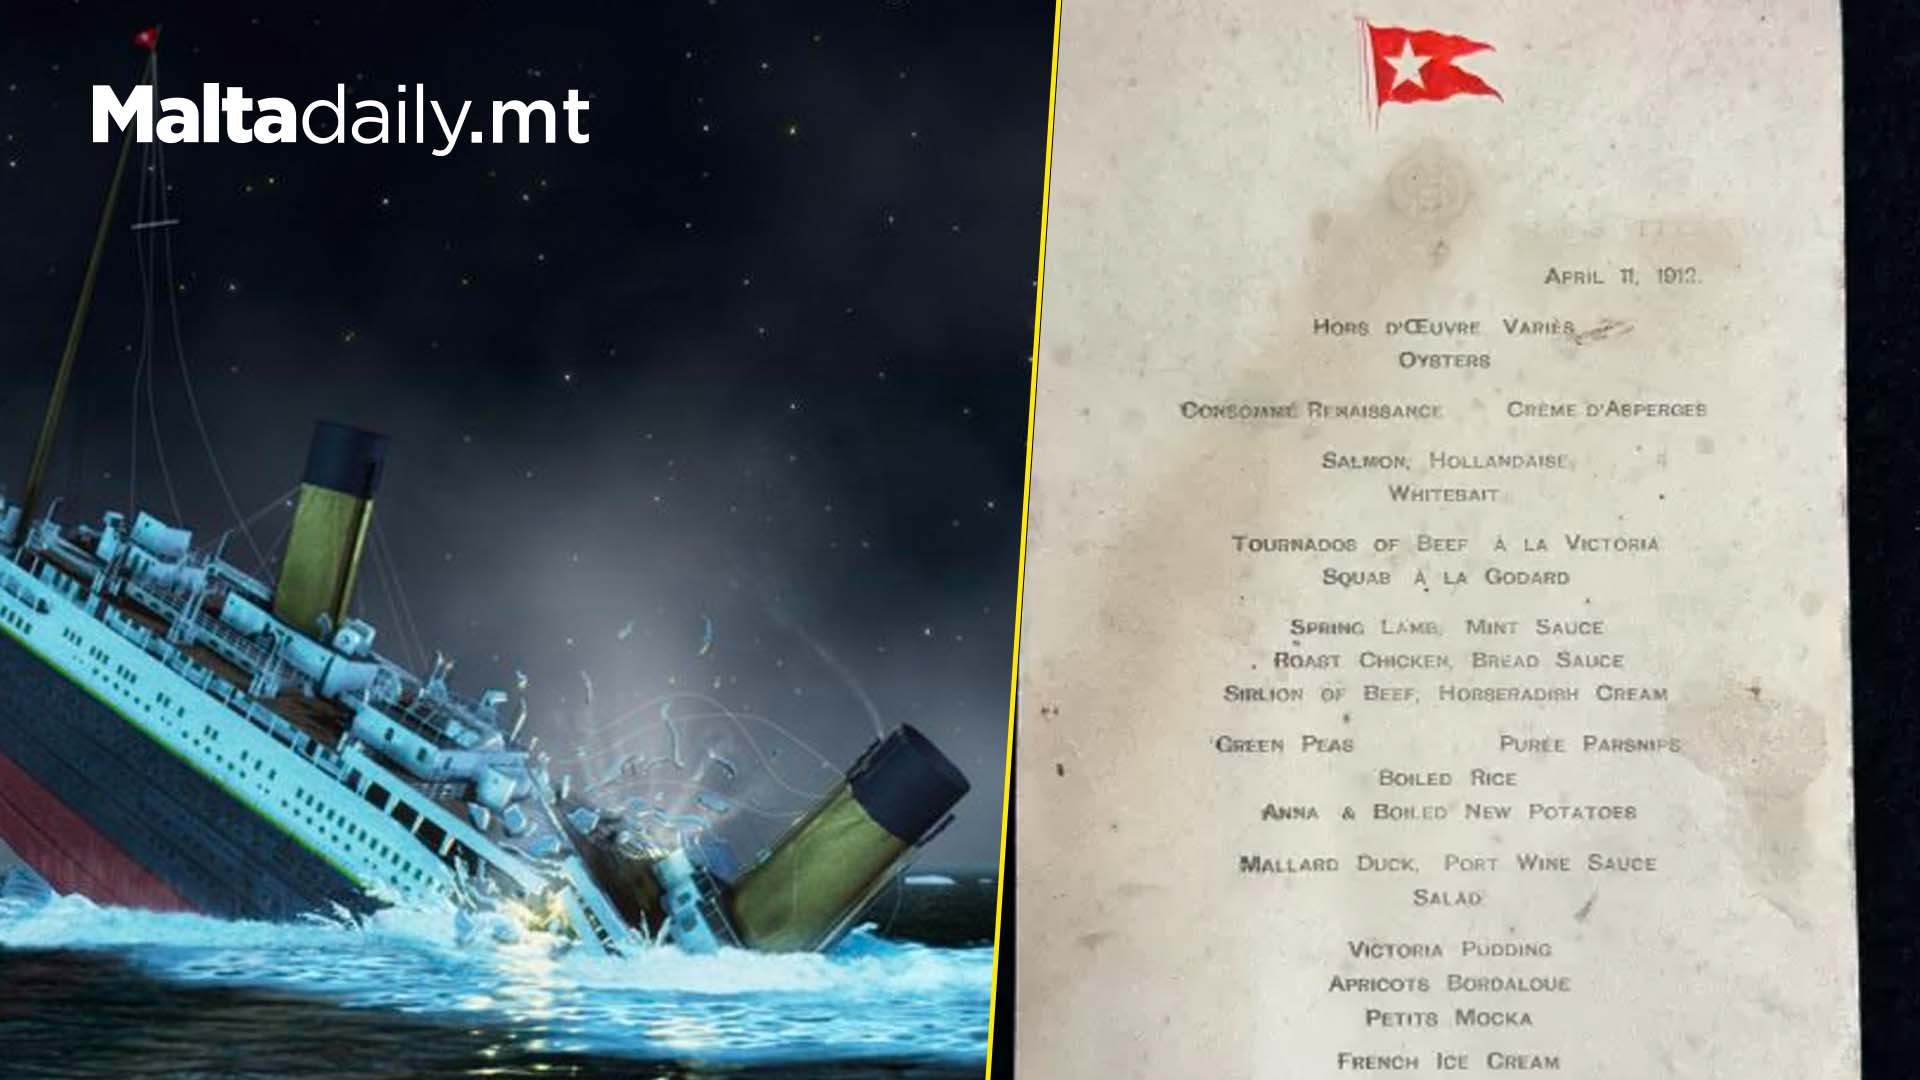 Here Is What Passengers On The Titanic Were Having For Dinner